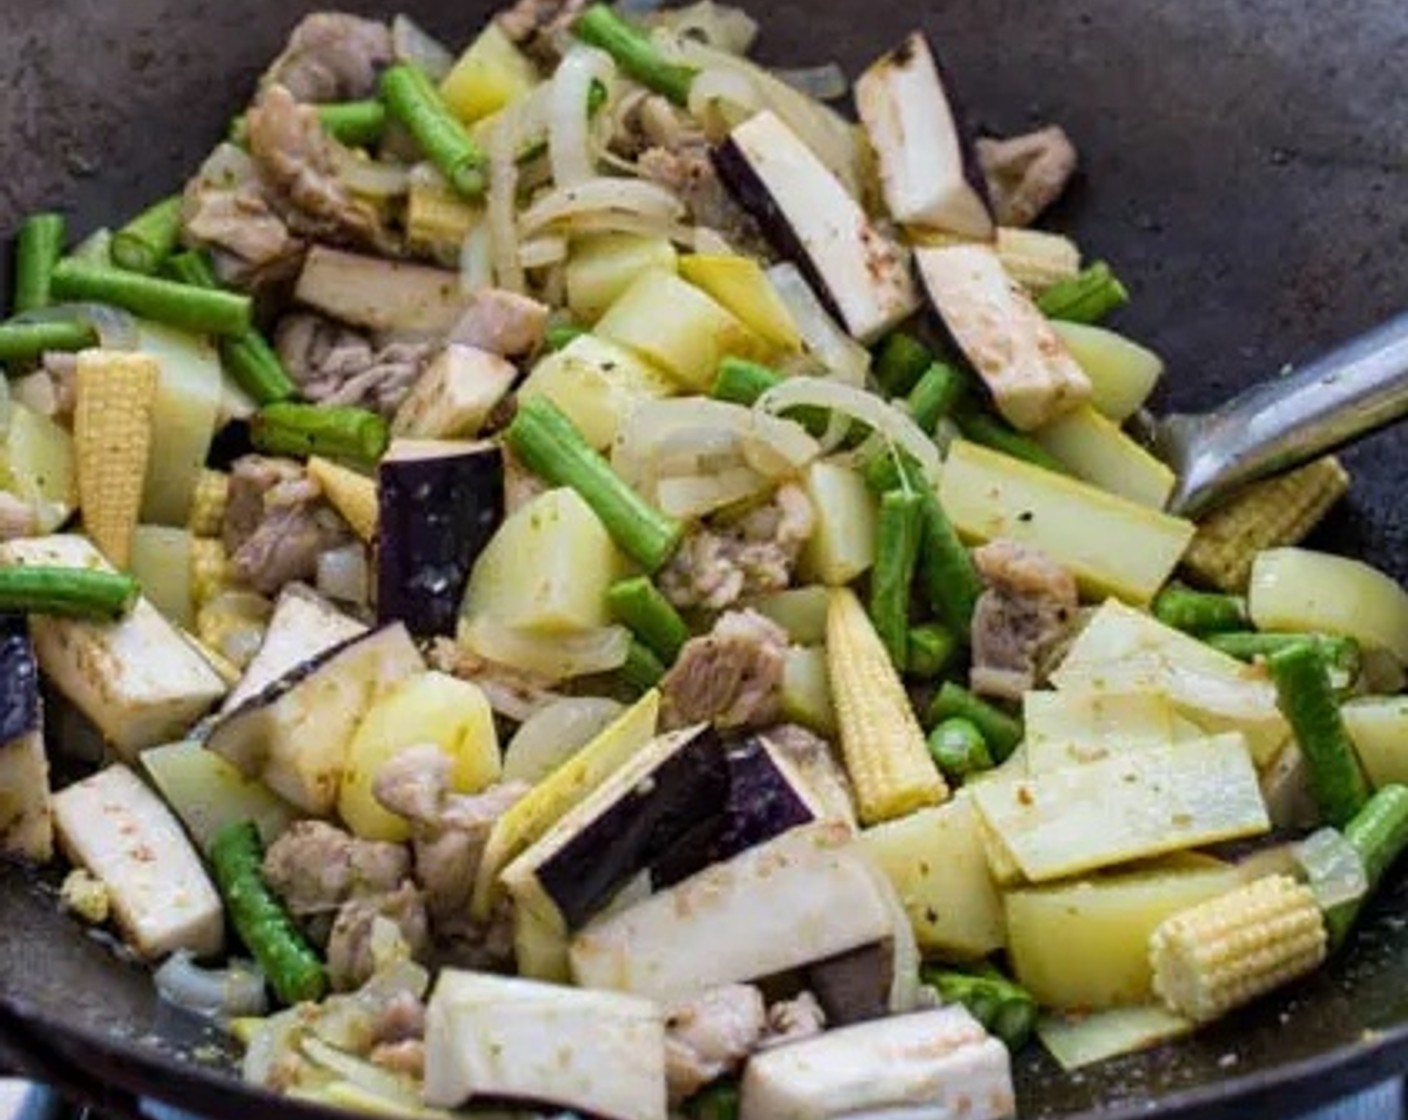 step 5 Add Eggplant (1), Green Beans (1 cup), Baby Corn (1 cup), Bamboo Shoot Strips (1/4 cup) and the potatoes to the wok. Stir well to distribute the green curry paste evenly among all of the vegetables.